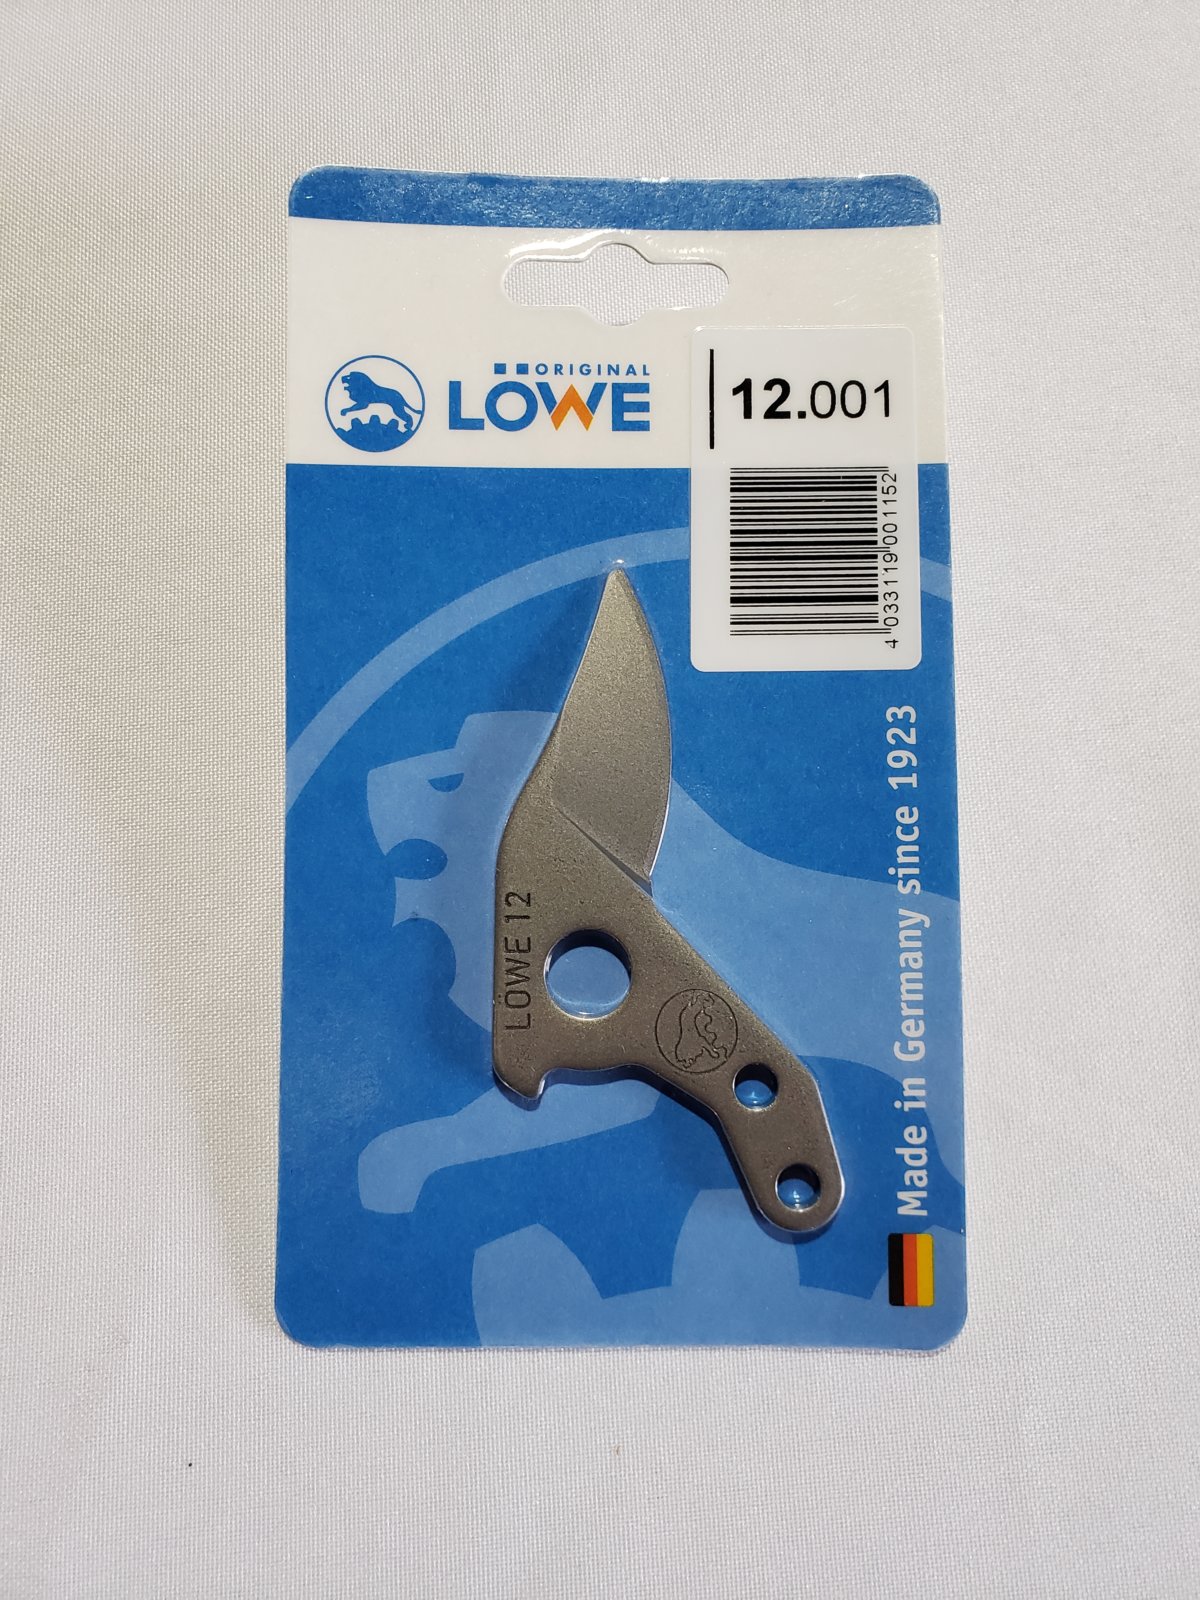 Lowe Replacement Blade 12.001 For Lowe No 12.104 & 12.109 Shear